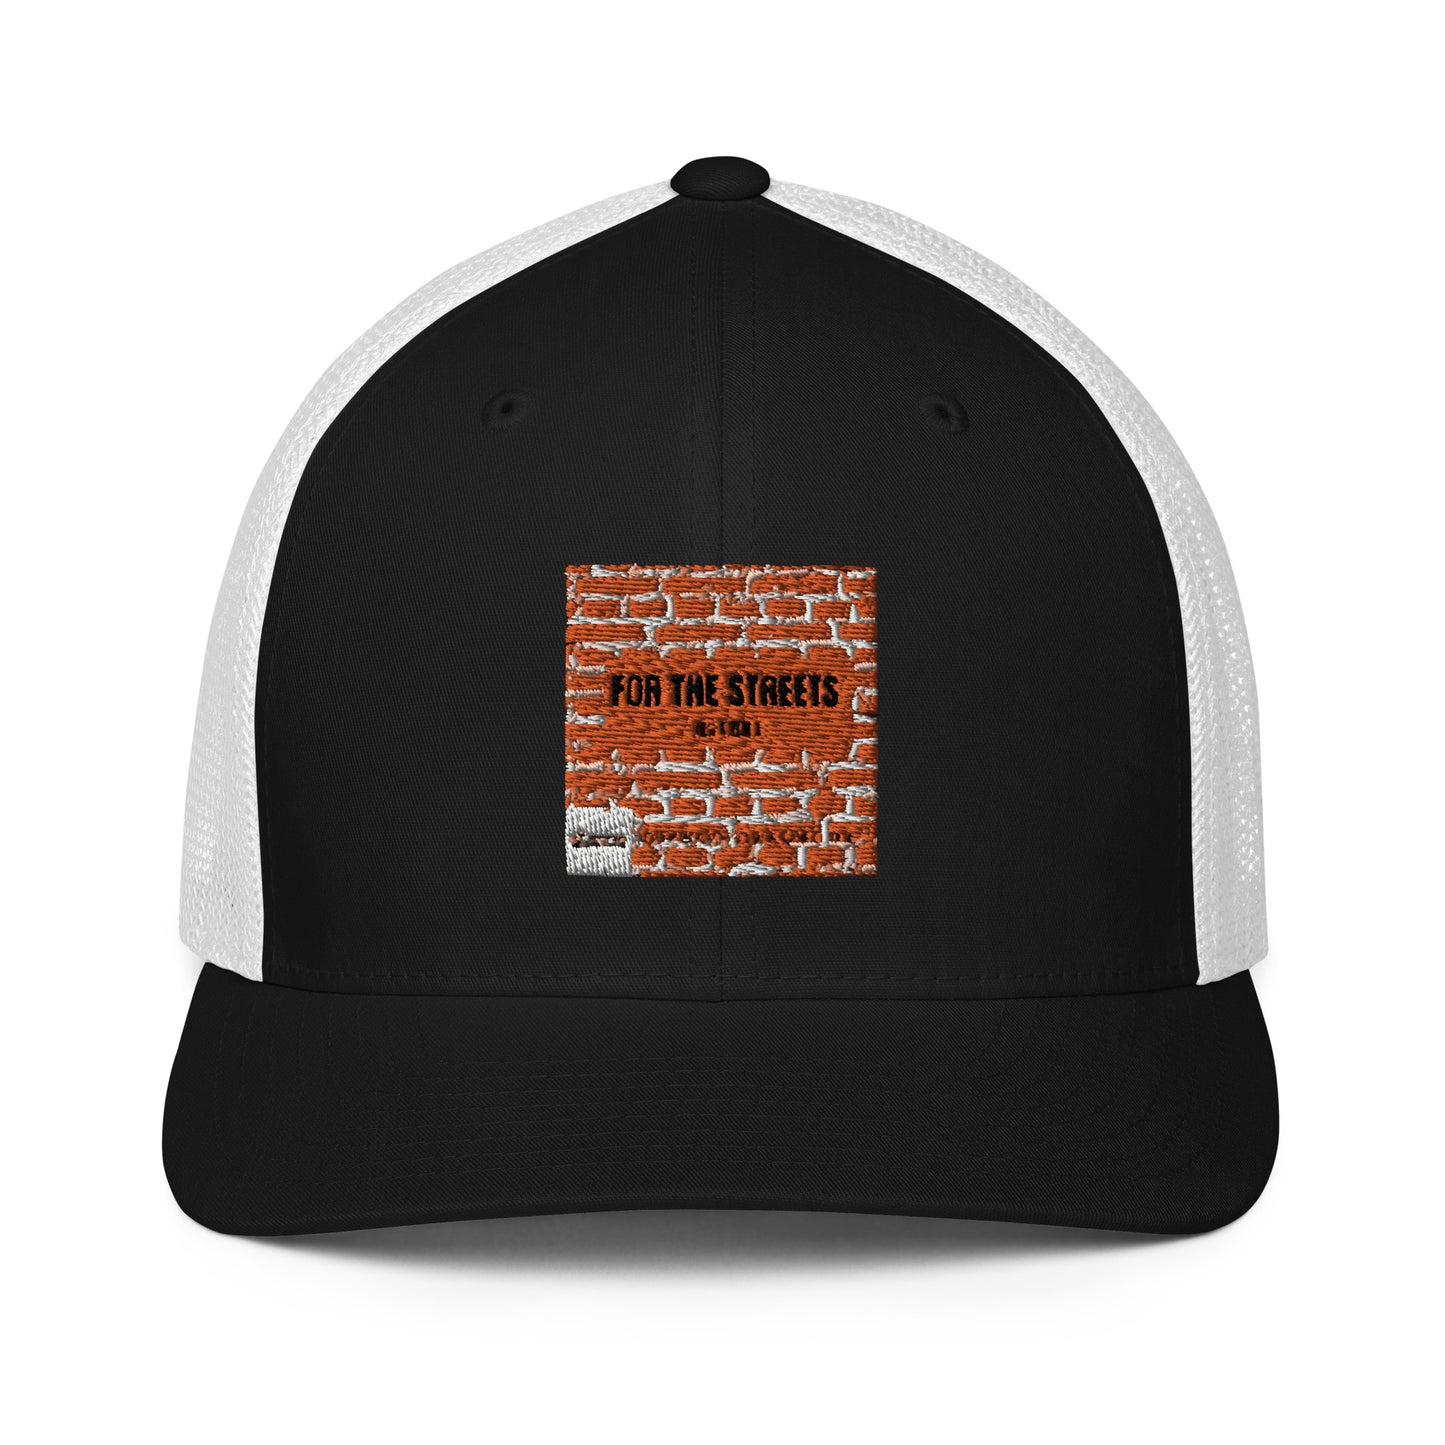 FOR THE STREETS Closed-back trucker cap